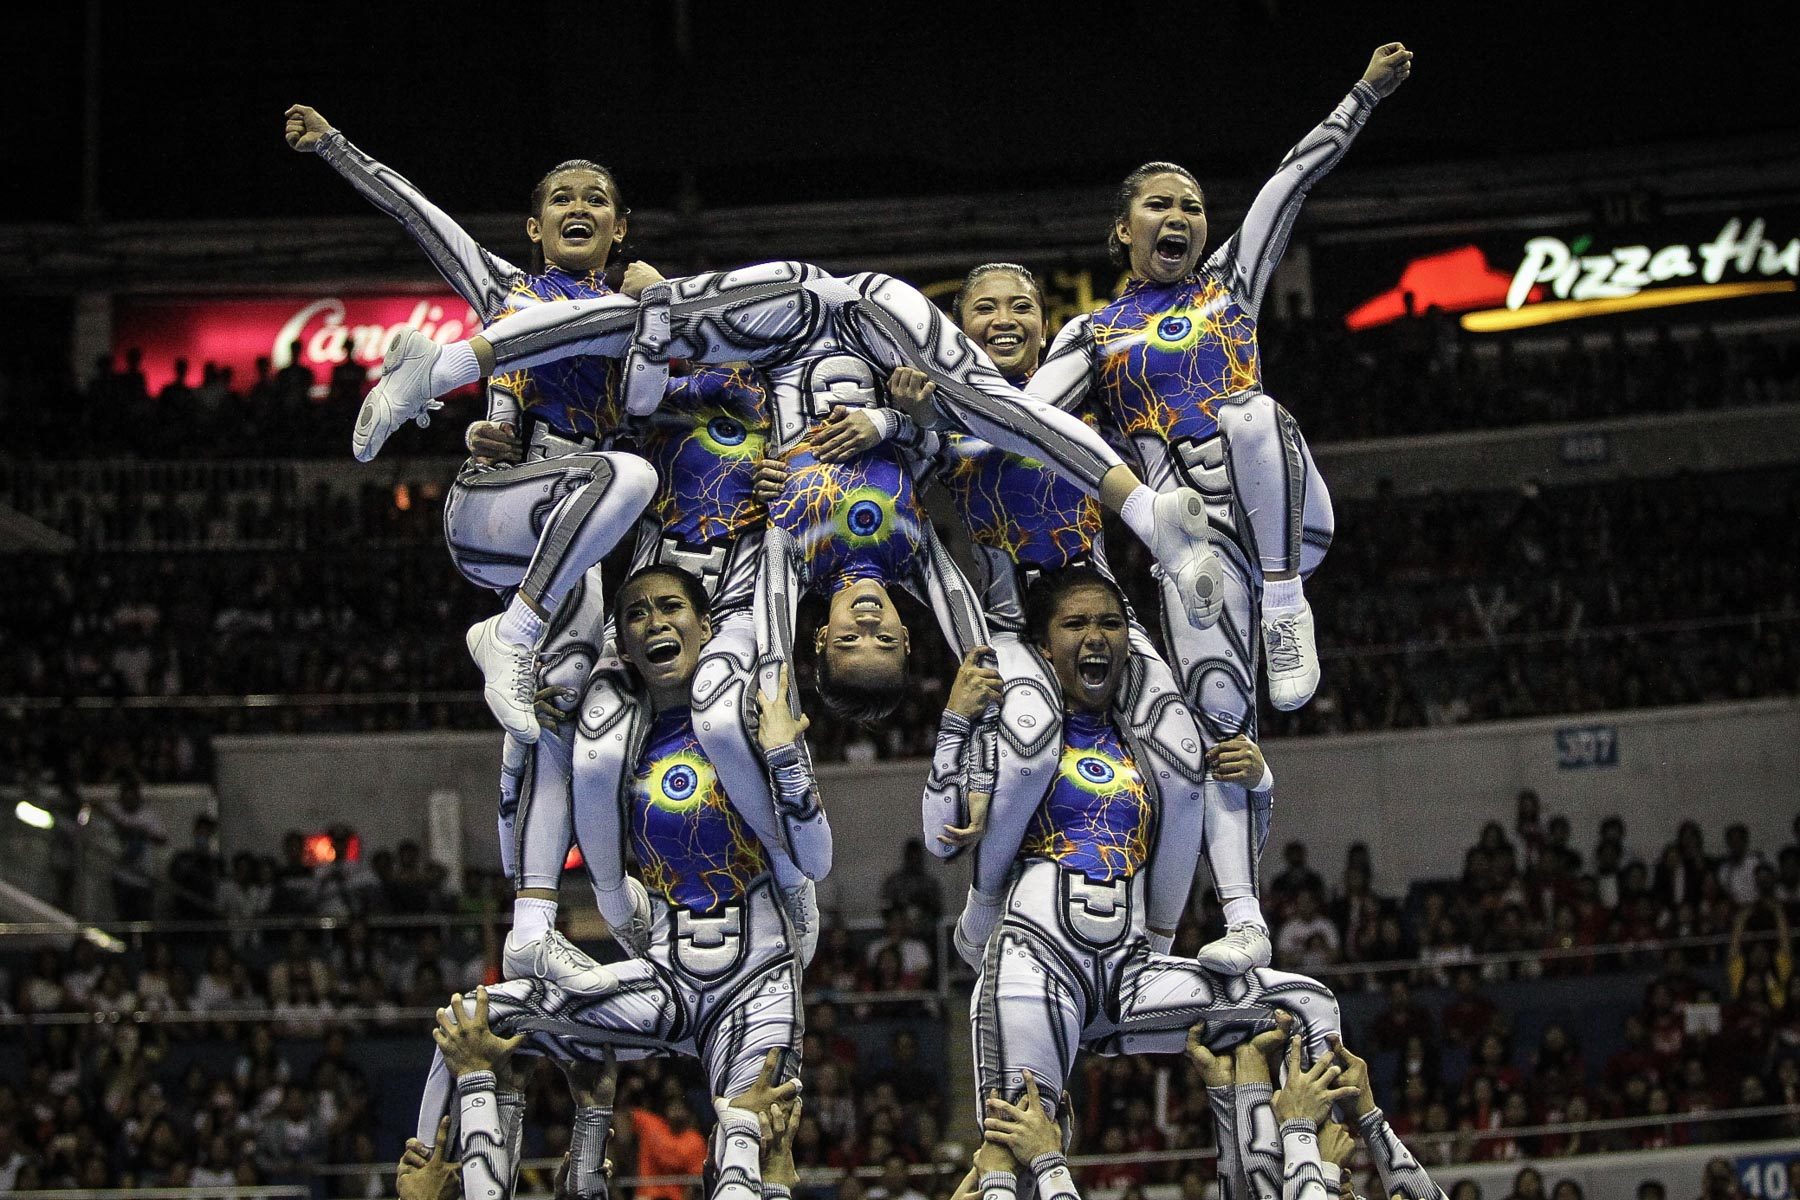 Order of Performances: UAAP Season 80 Cheer Dance competition